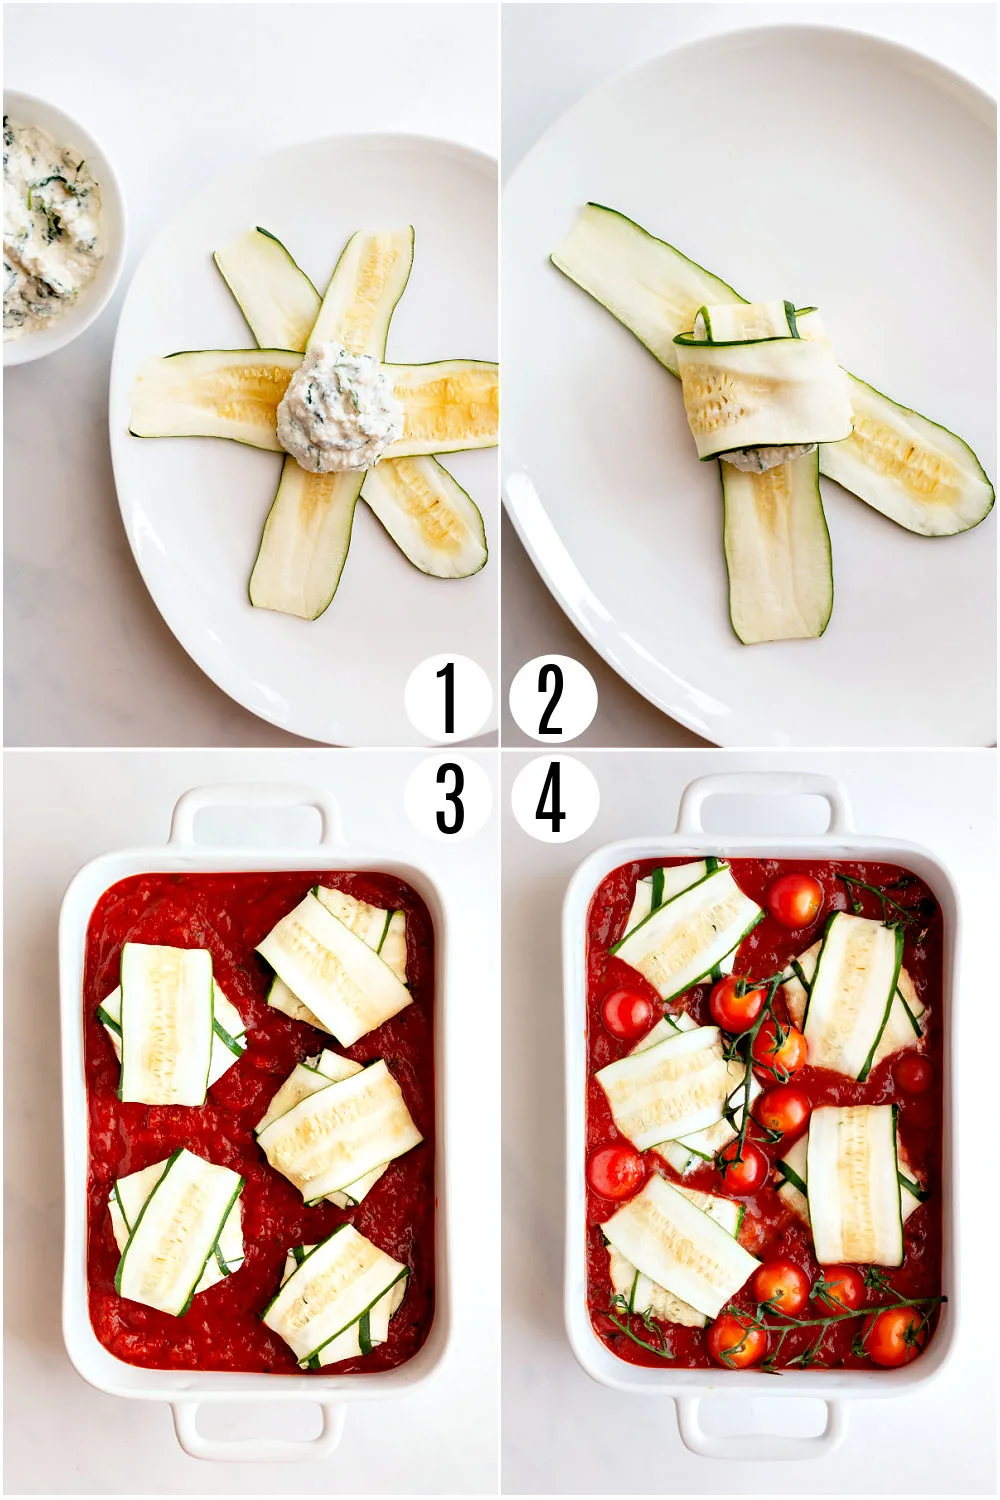 Step by step photos showing how to assemble zucchini rollups.